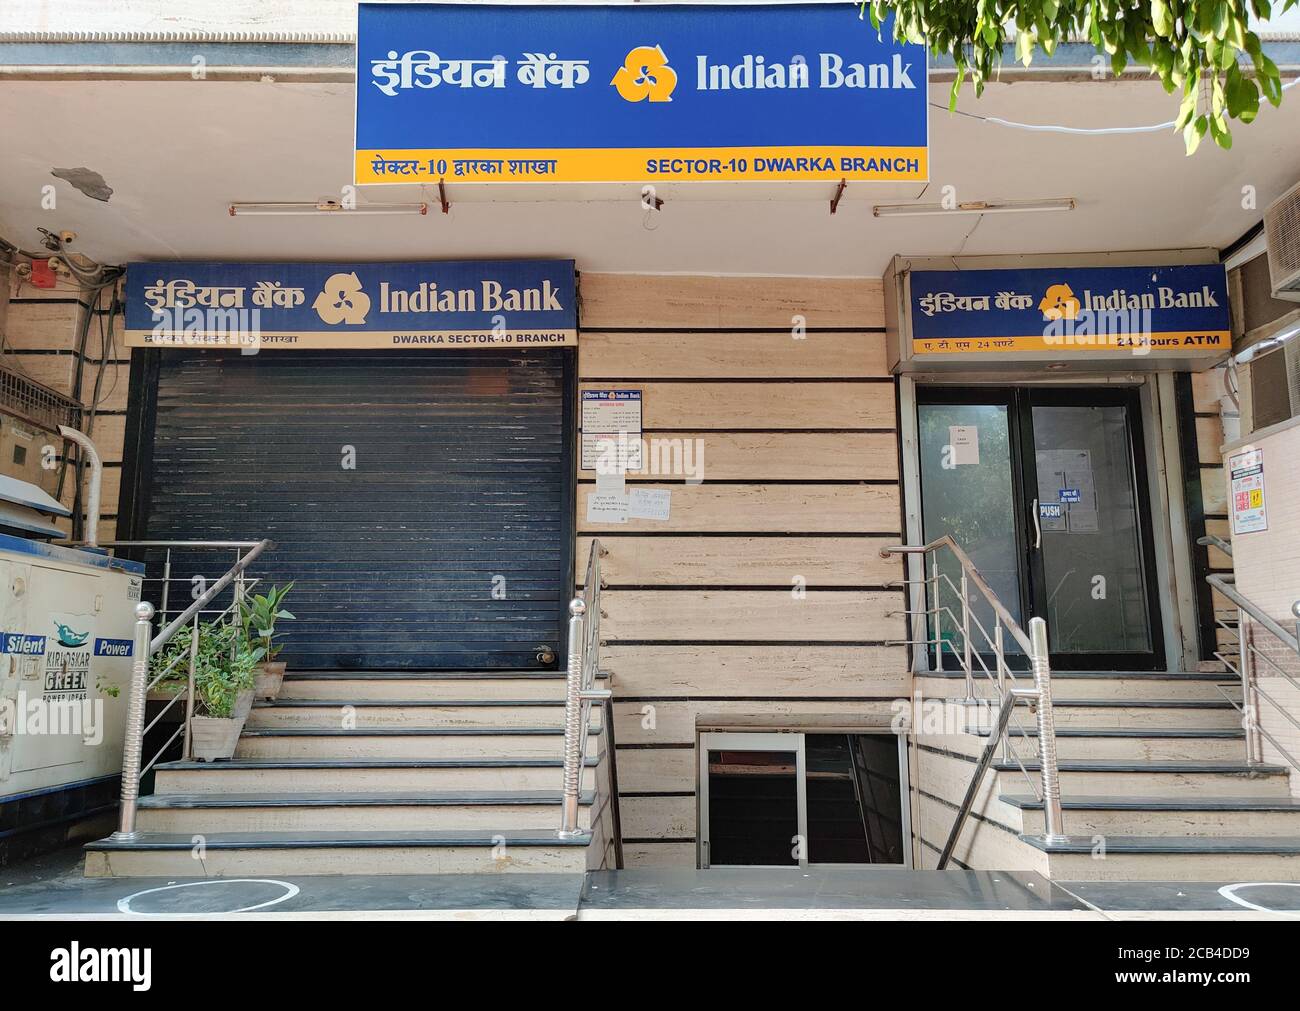 New Delhi, India, 2020. Indian Bank is an Indian state-owned financial services company established in 1907 and headquartered in Chennai, Tamil Nadu, Stock Photo